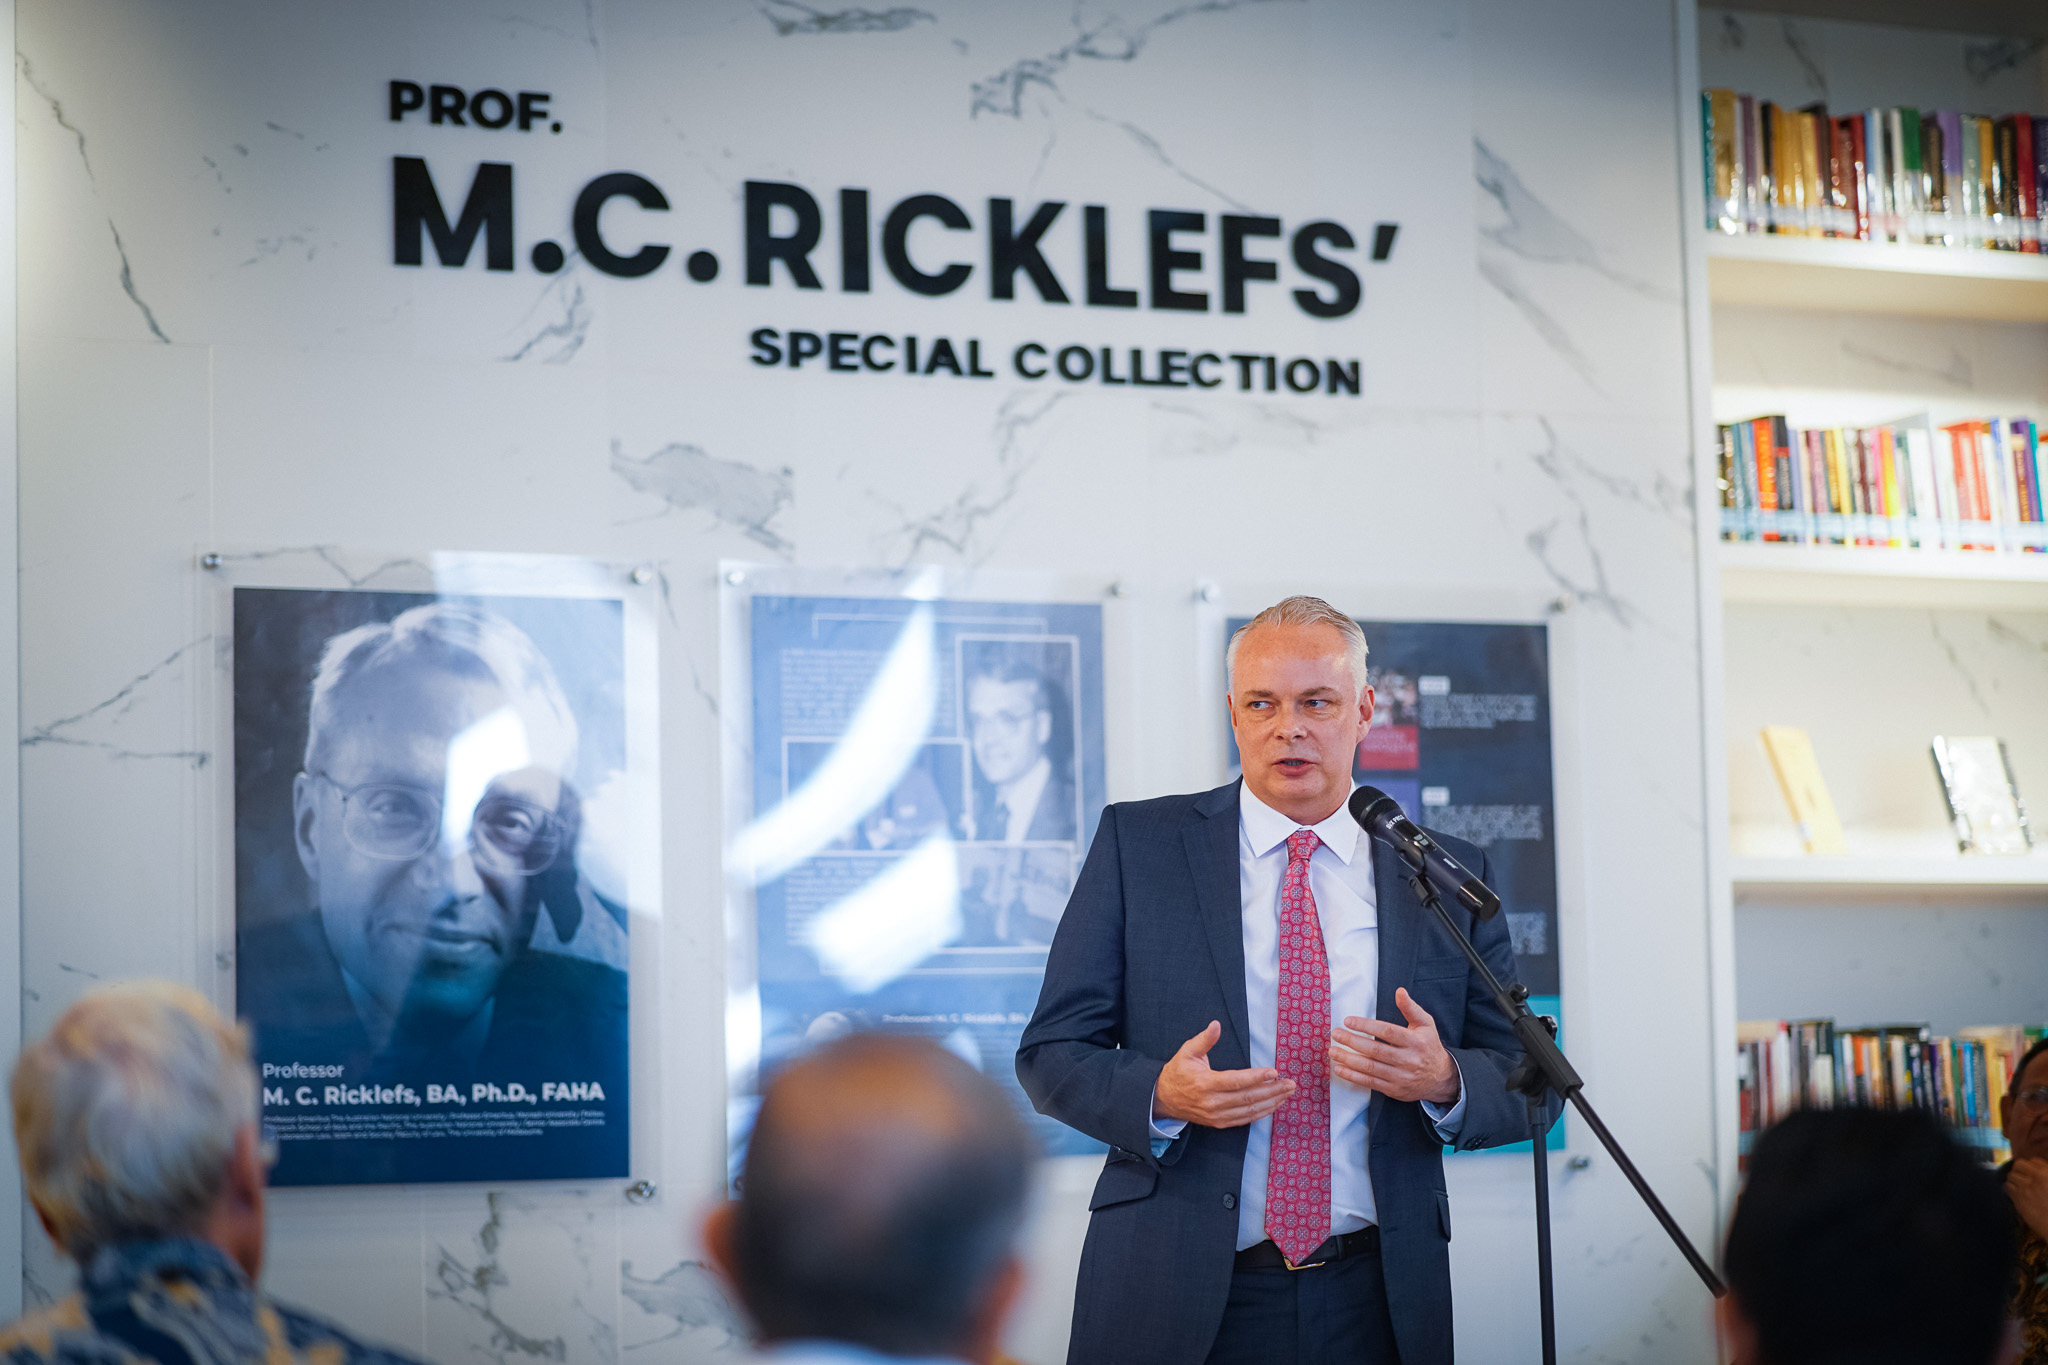 Corner for Prof. M.C. Ricklefs’ Special Collection Officially Launched